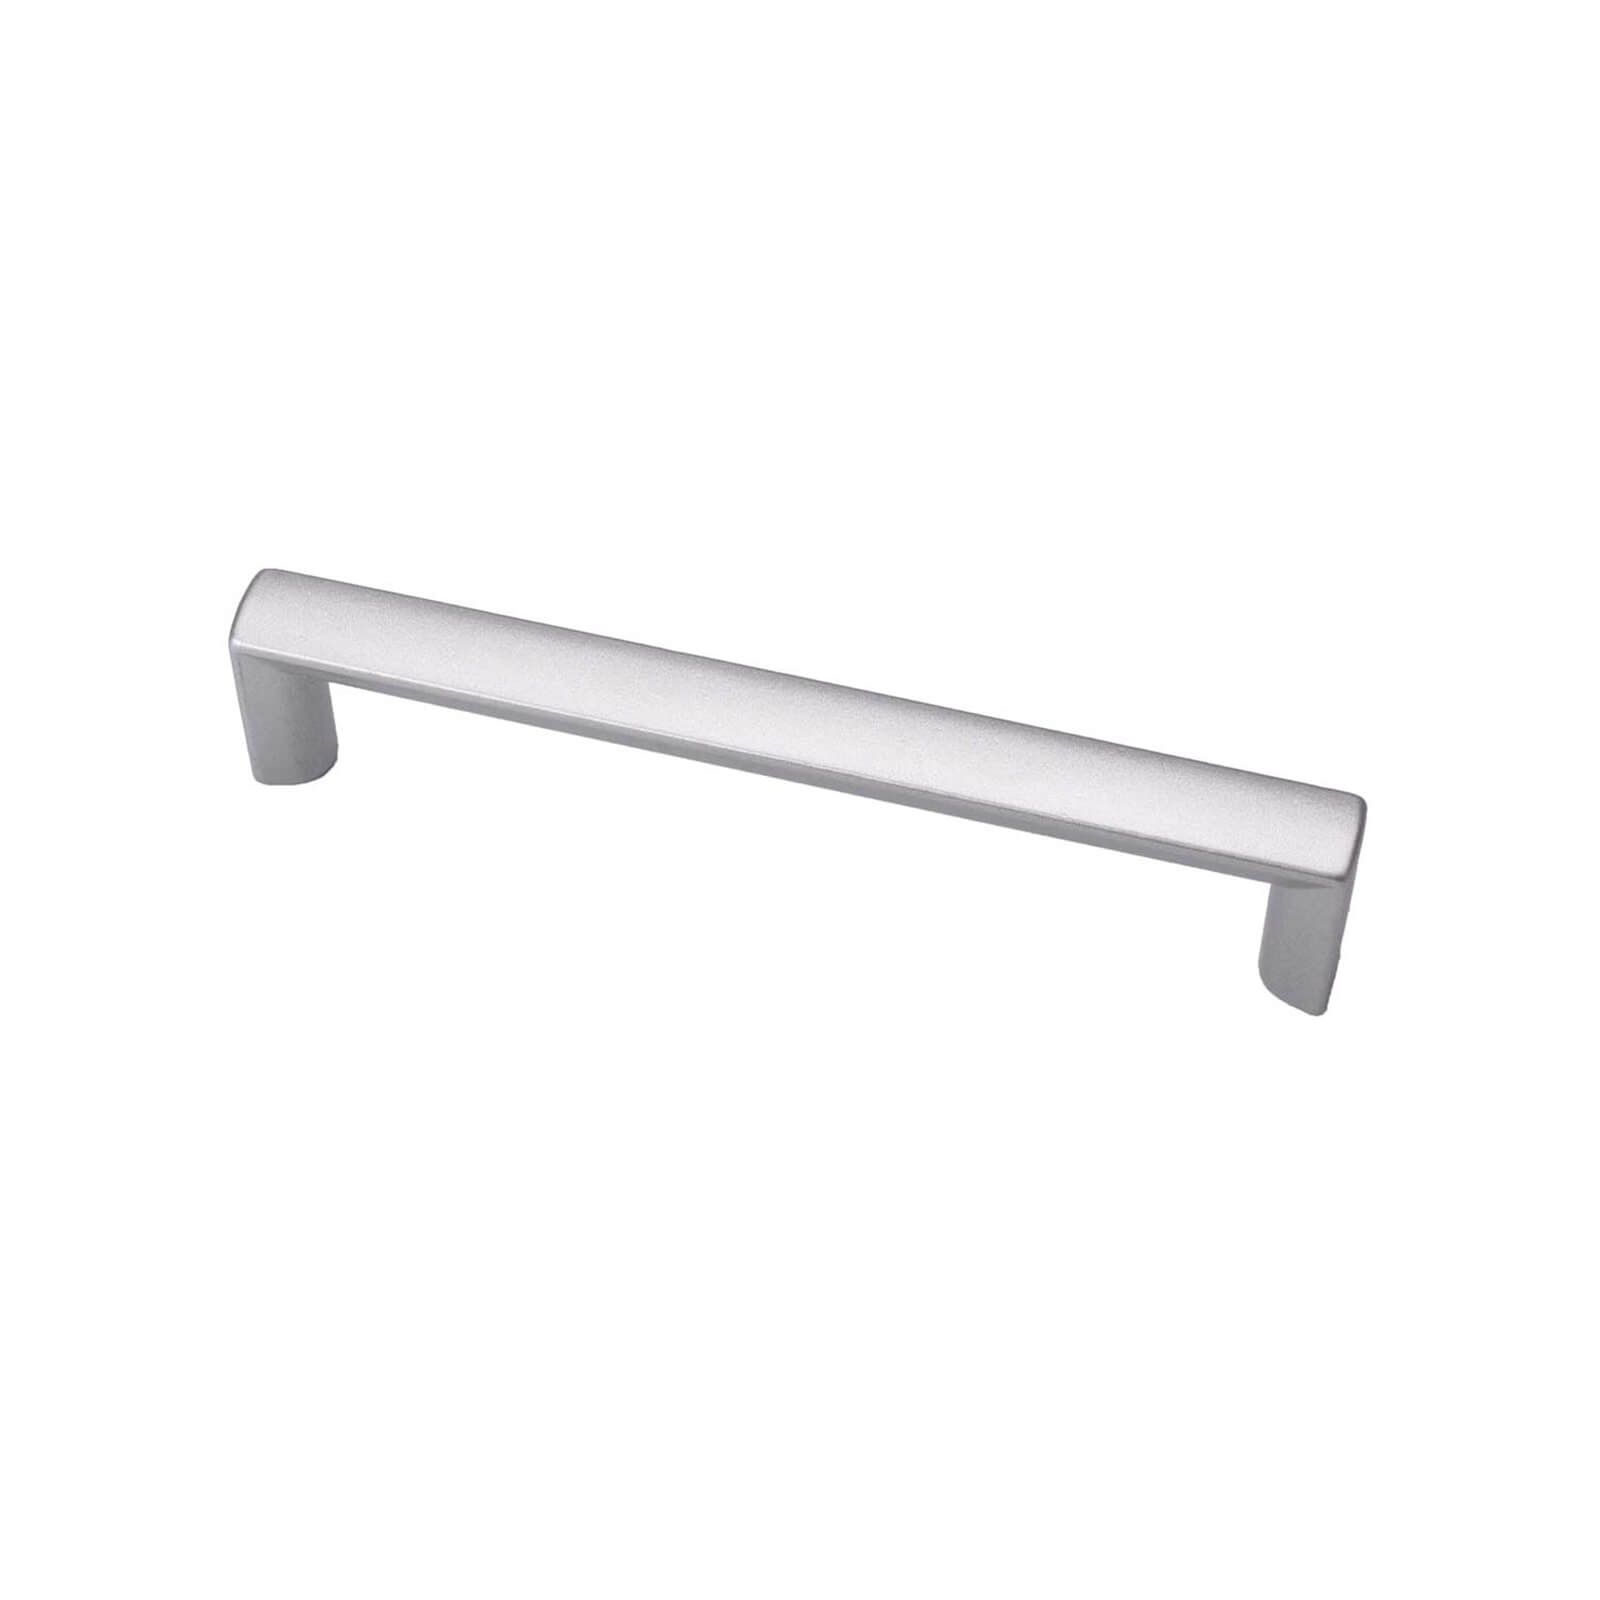 Square End Mitred Handle - Satin Nickel - 96mm